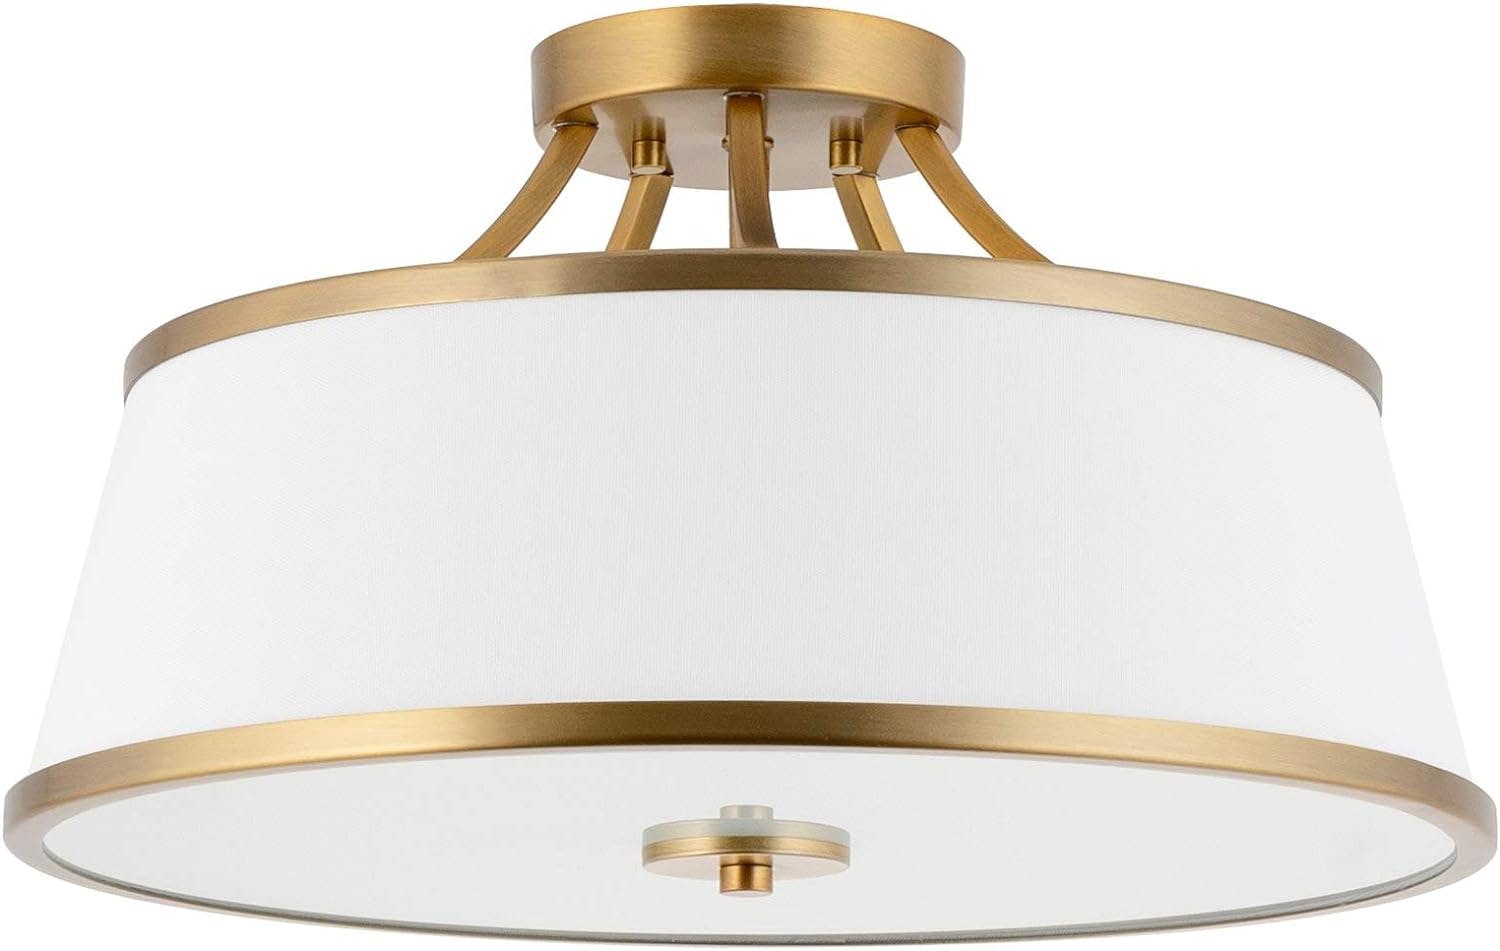 Zoey Warm Brass 17.5" Modern 3-Light Drum Ceiling Light with White Fabric Shade